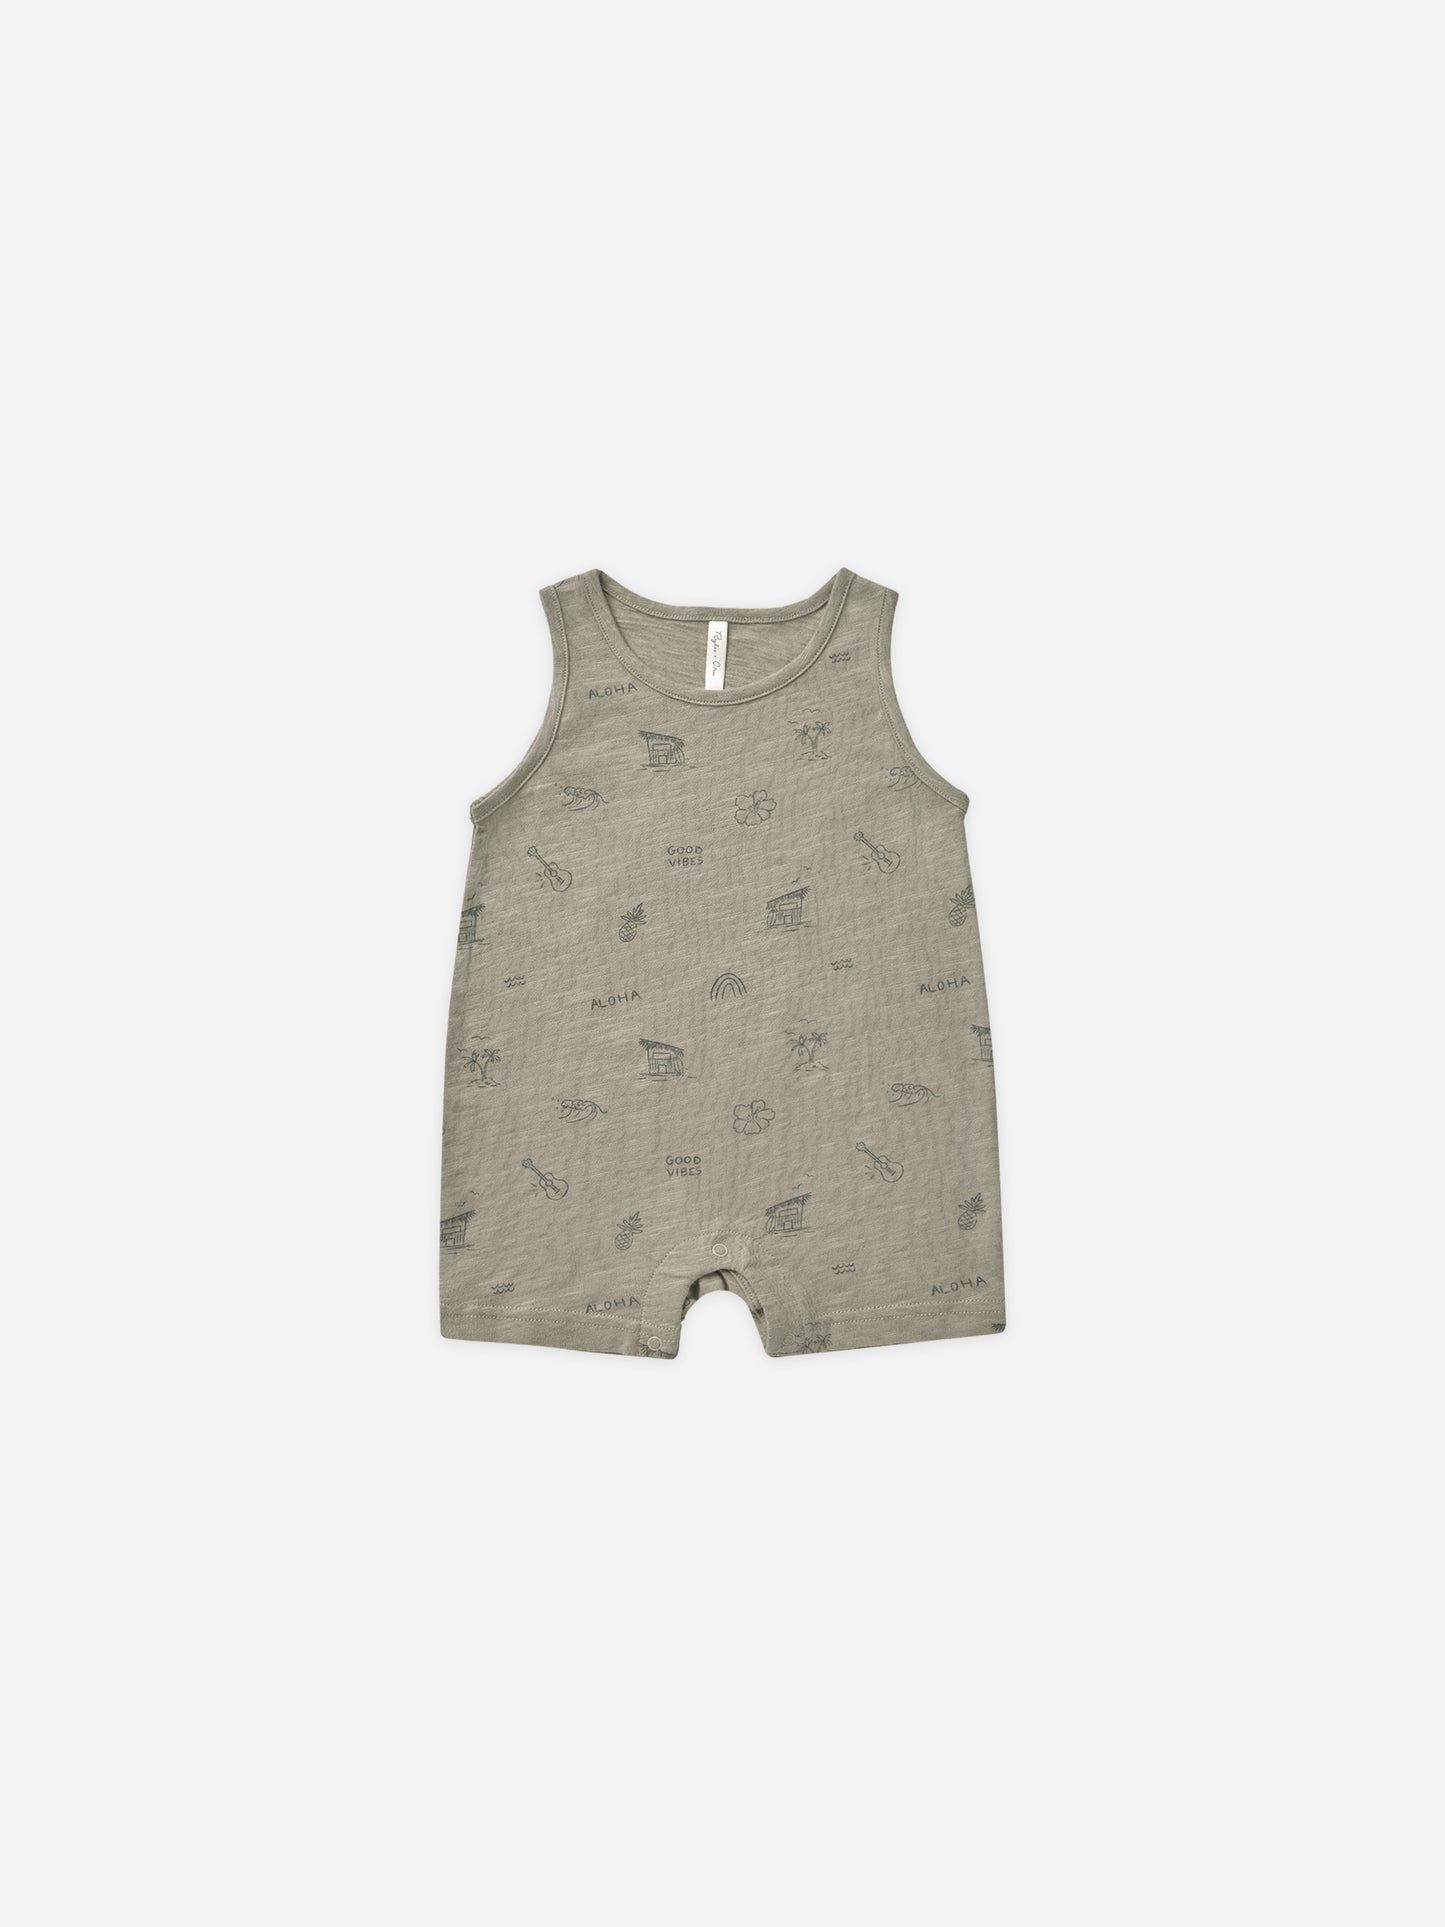 Sleeveless One-Piece || Hawaii - Rylee + Cru | Kids Clothes | Trendy Baby Clothes | Modern Infant Outfits |